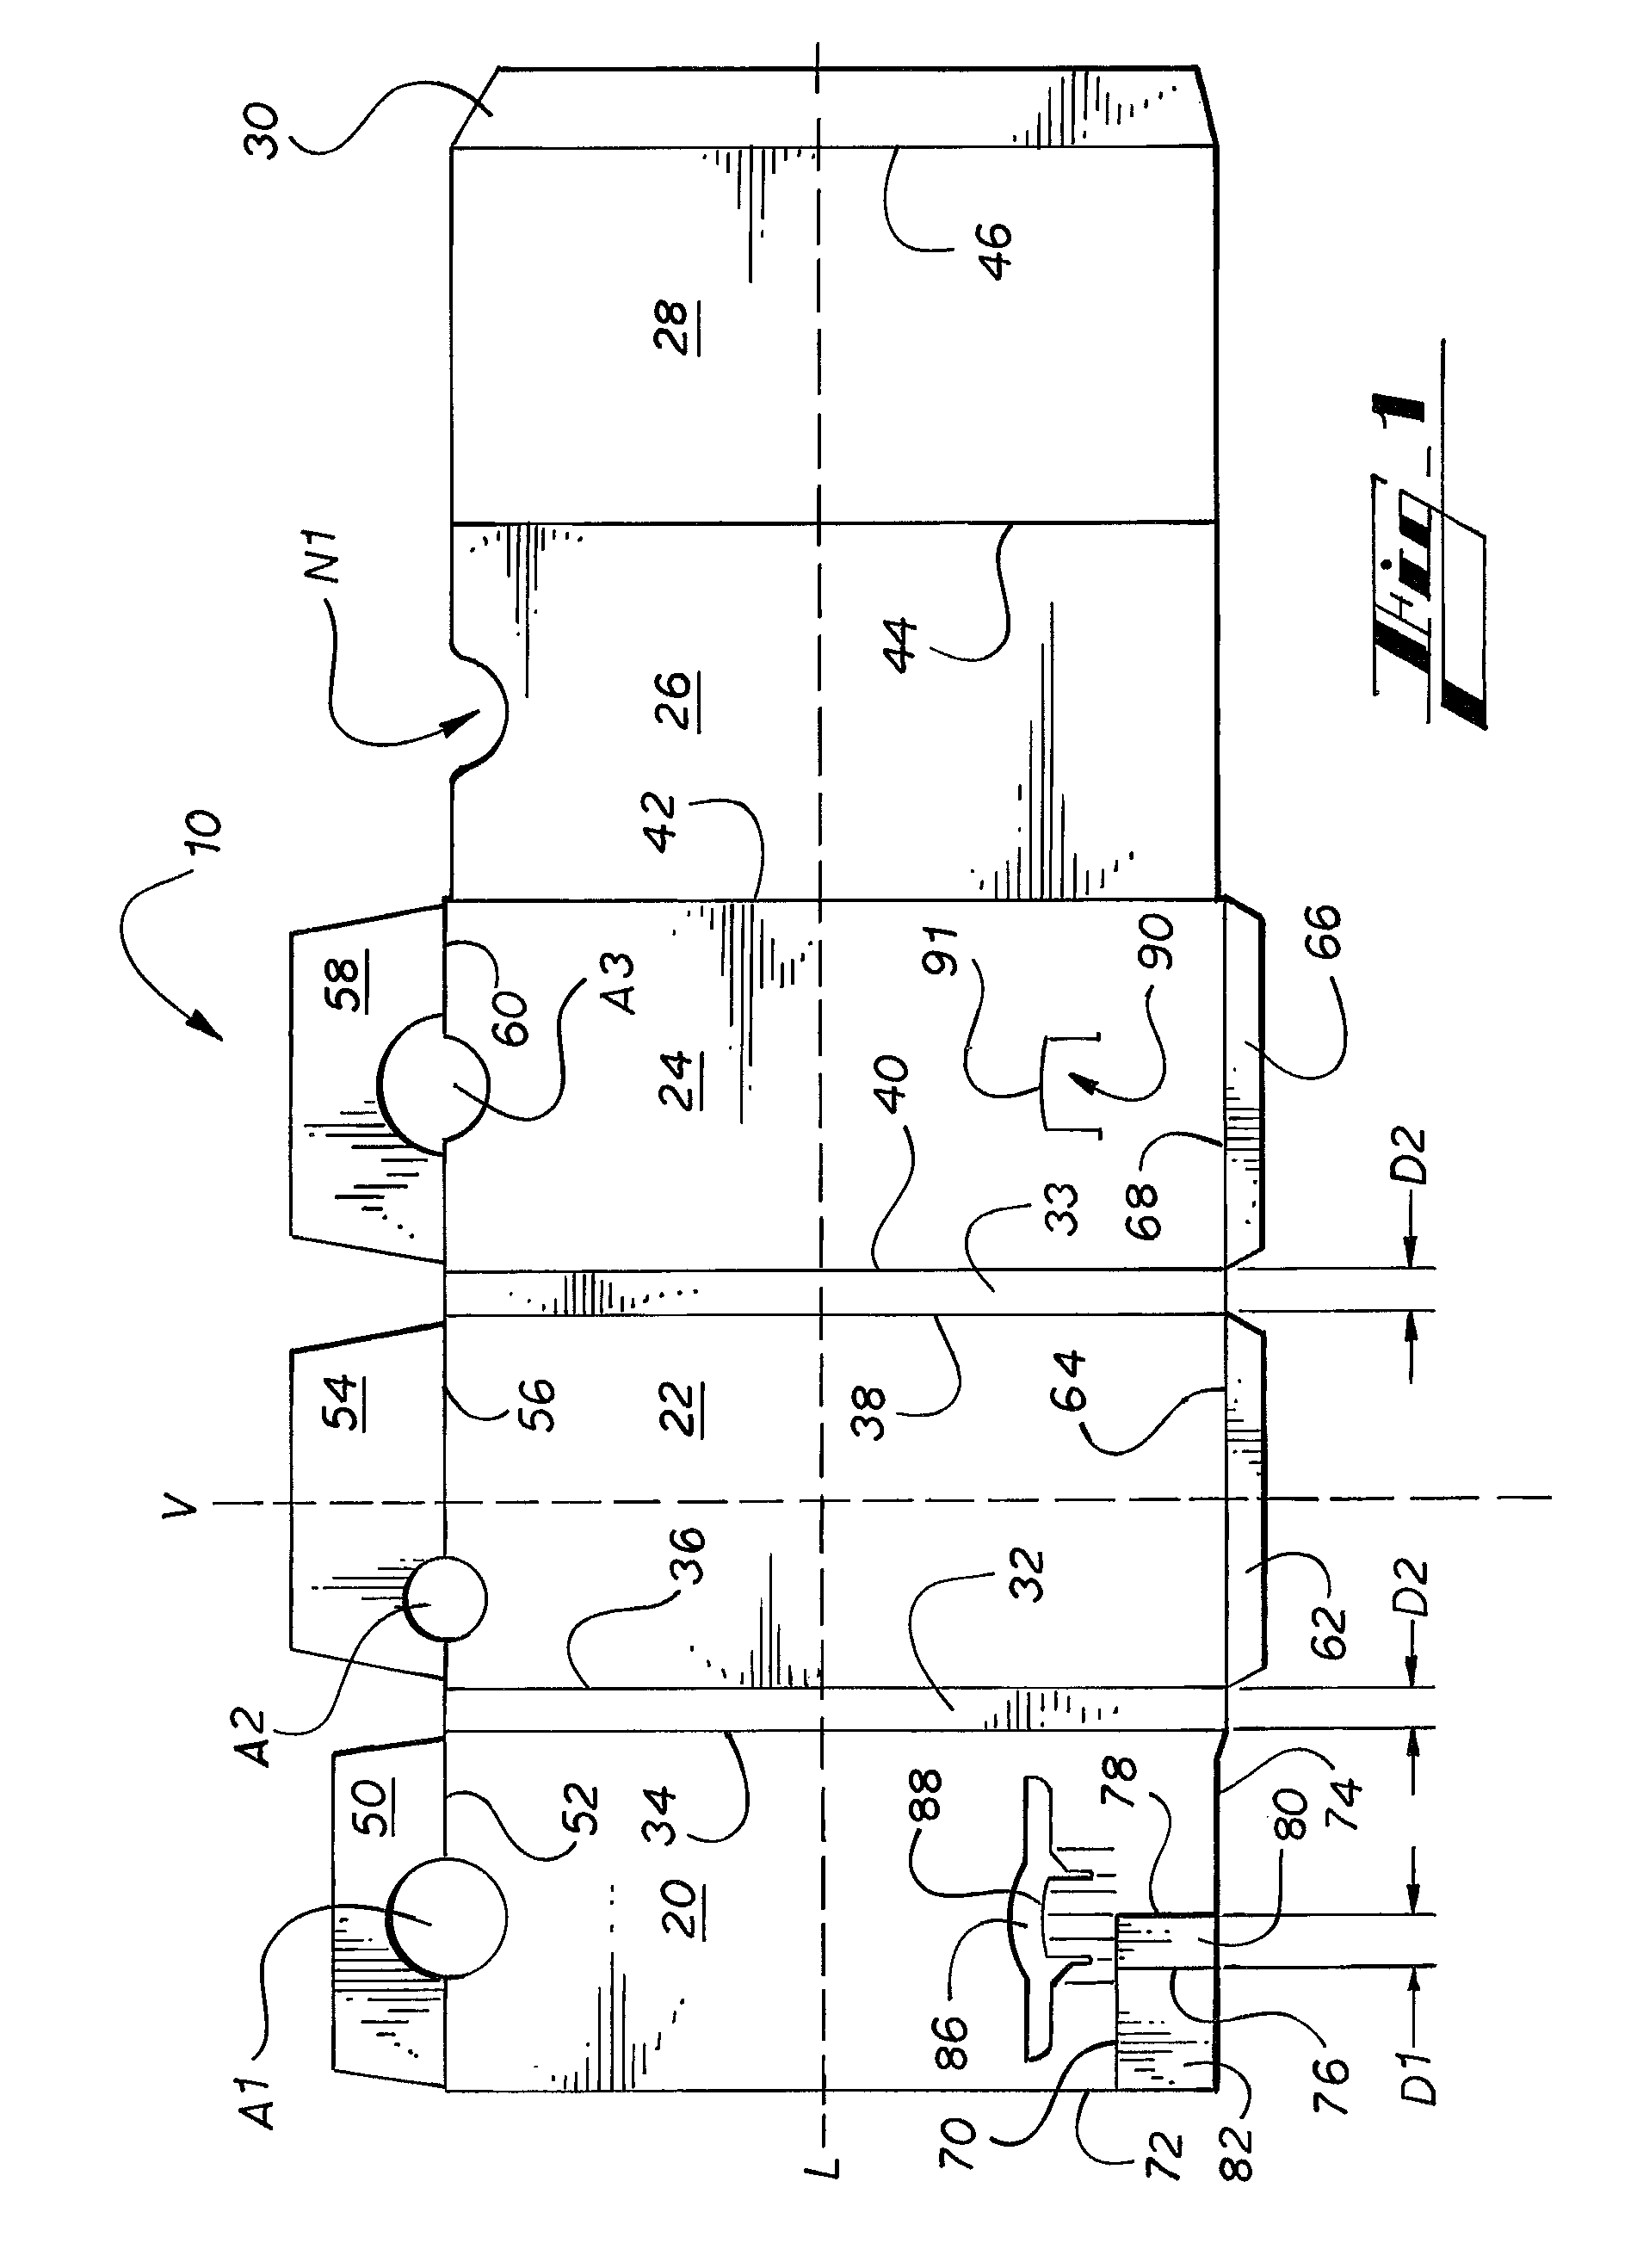 Packaging system with an improved inner structure